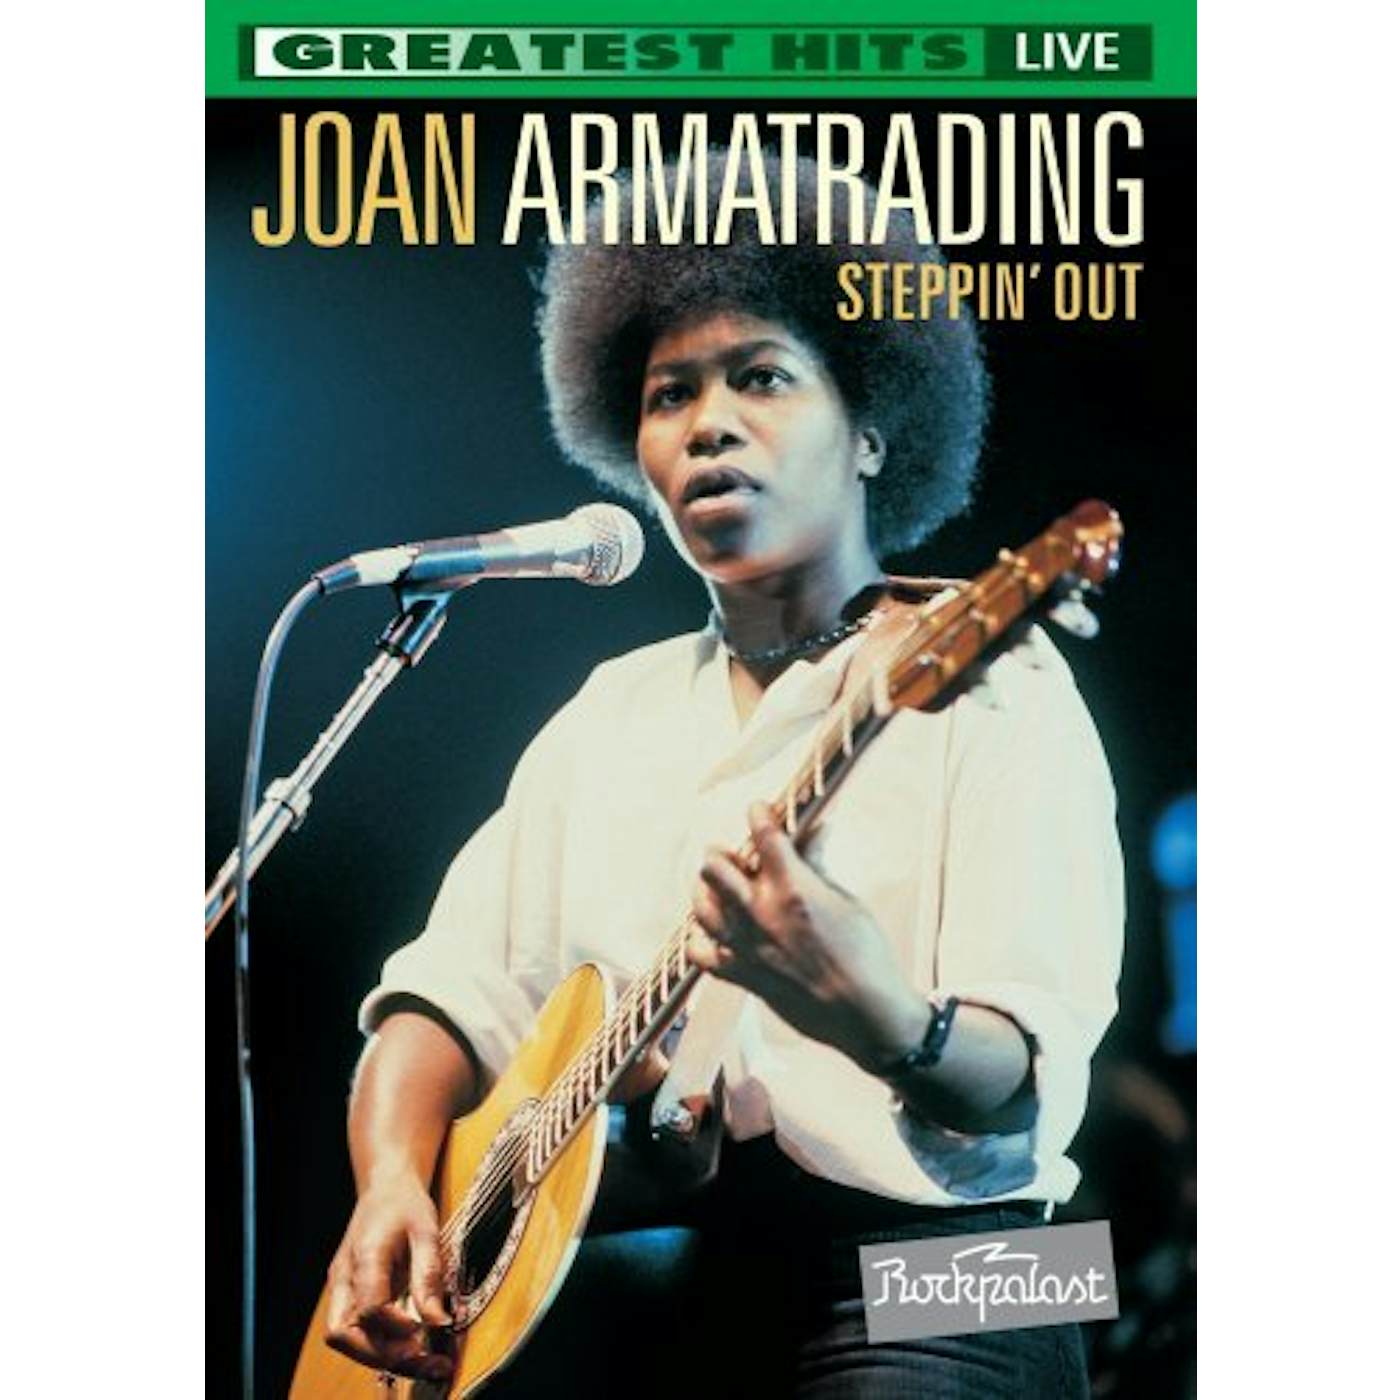 Joan Armatrading STEPPIN OUT DVD